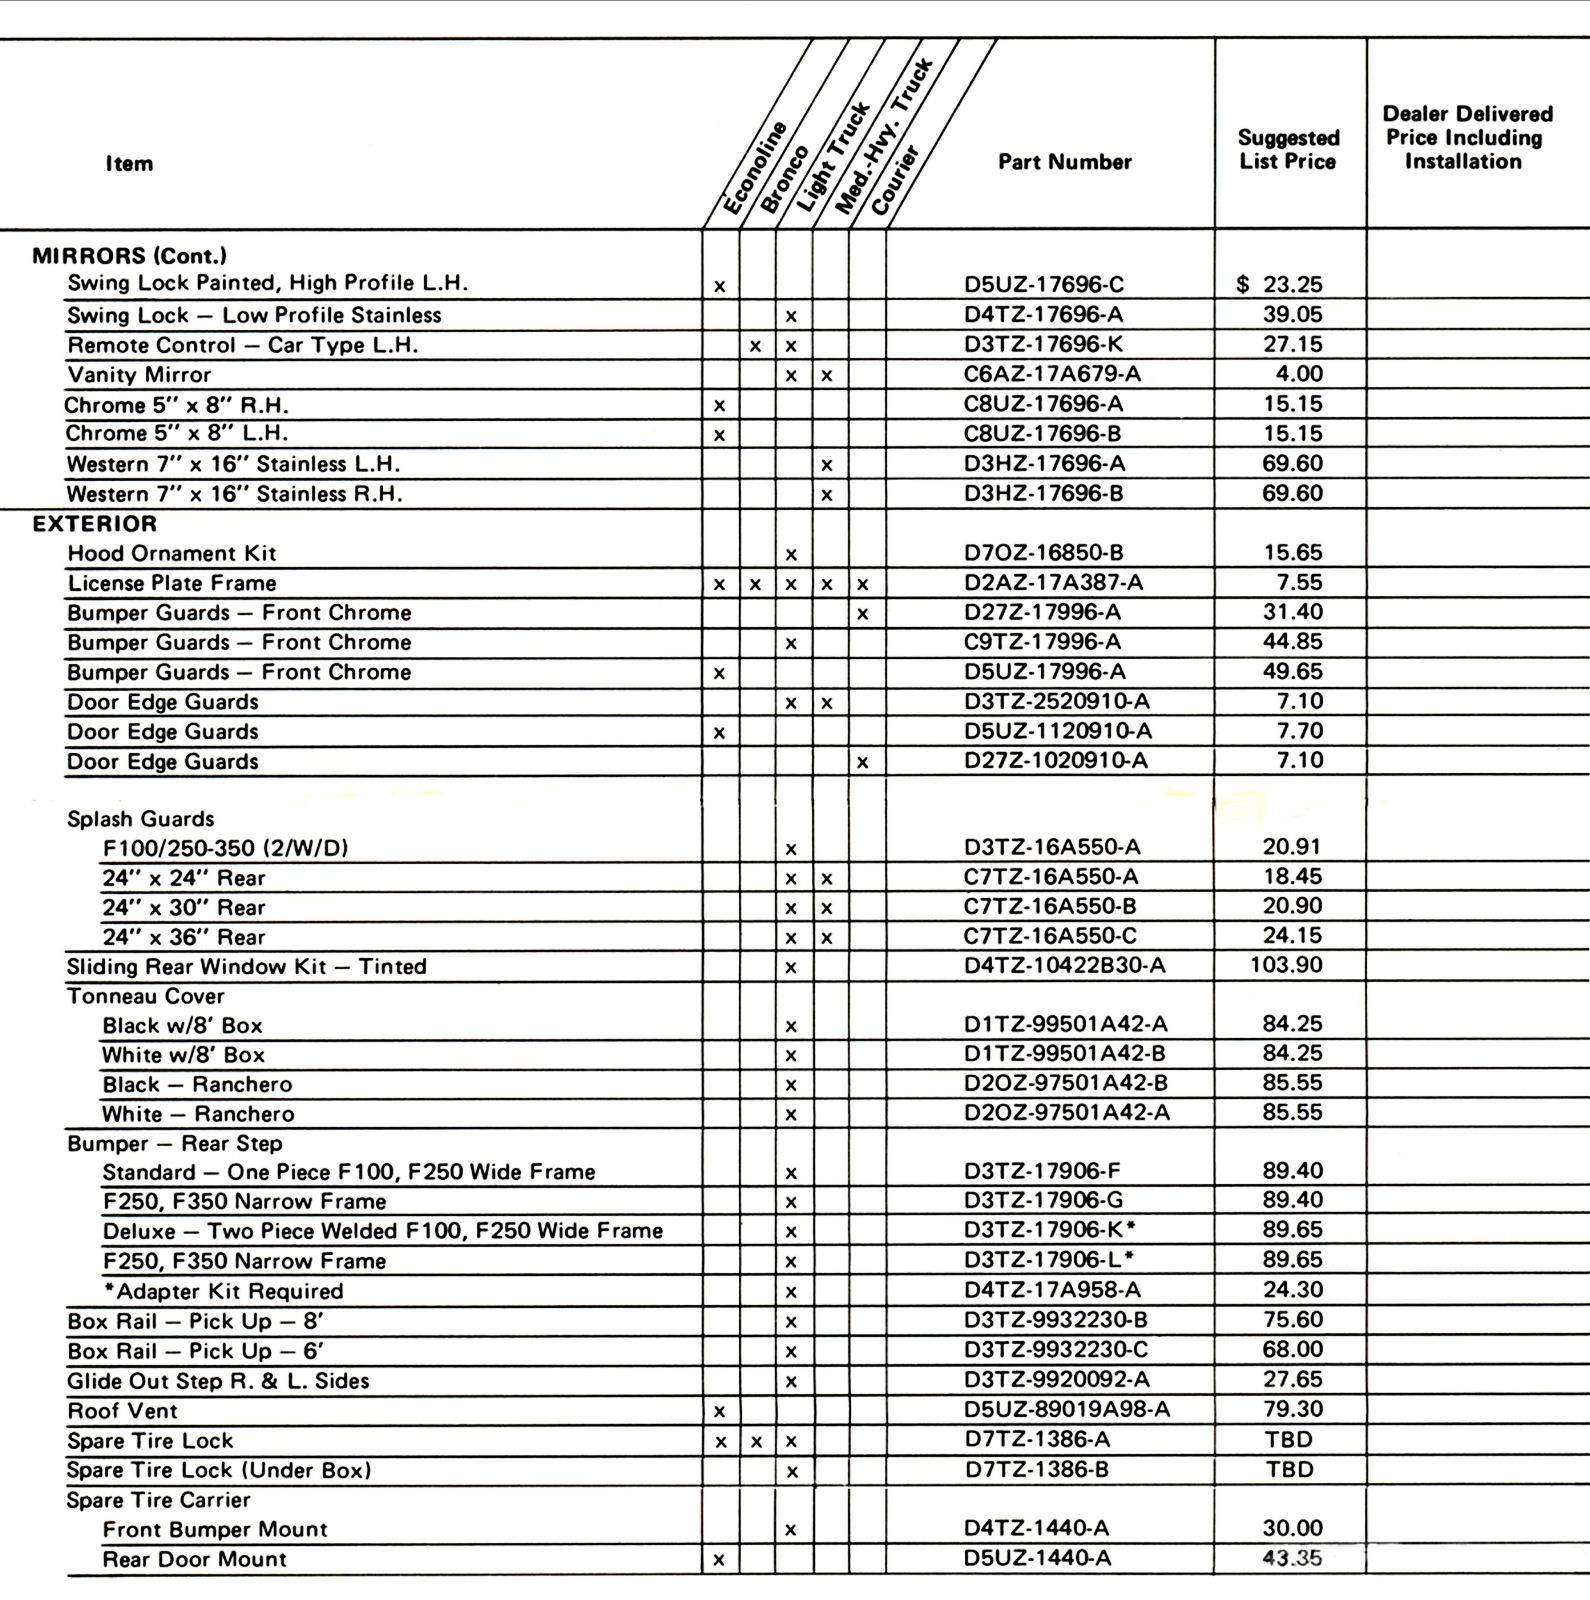 1977 Ford Truck Accessories Prices-06-07